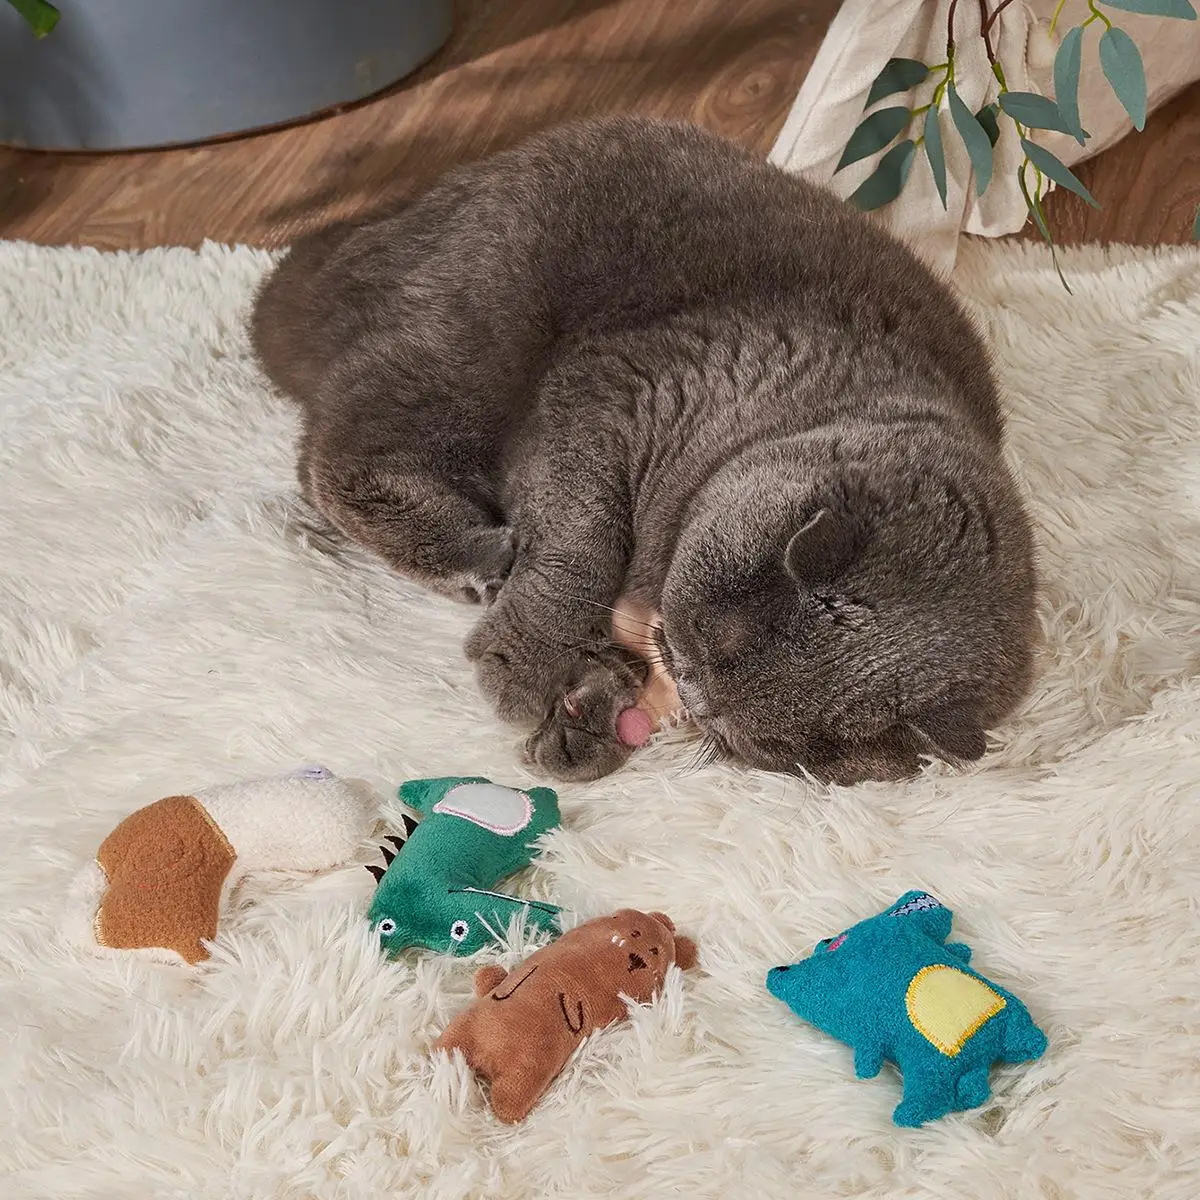 https://ae01.alicdn.com/kf/Sdc81f4d8d2fb456abb94be3f17f83837e/Cats-Toy-with-Catnip-Plush-Cat-Toys-for-Kitten-Teeth-Grinding-Thumb-Pillow-Chewing-Toy-Claws.jpg